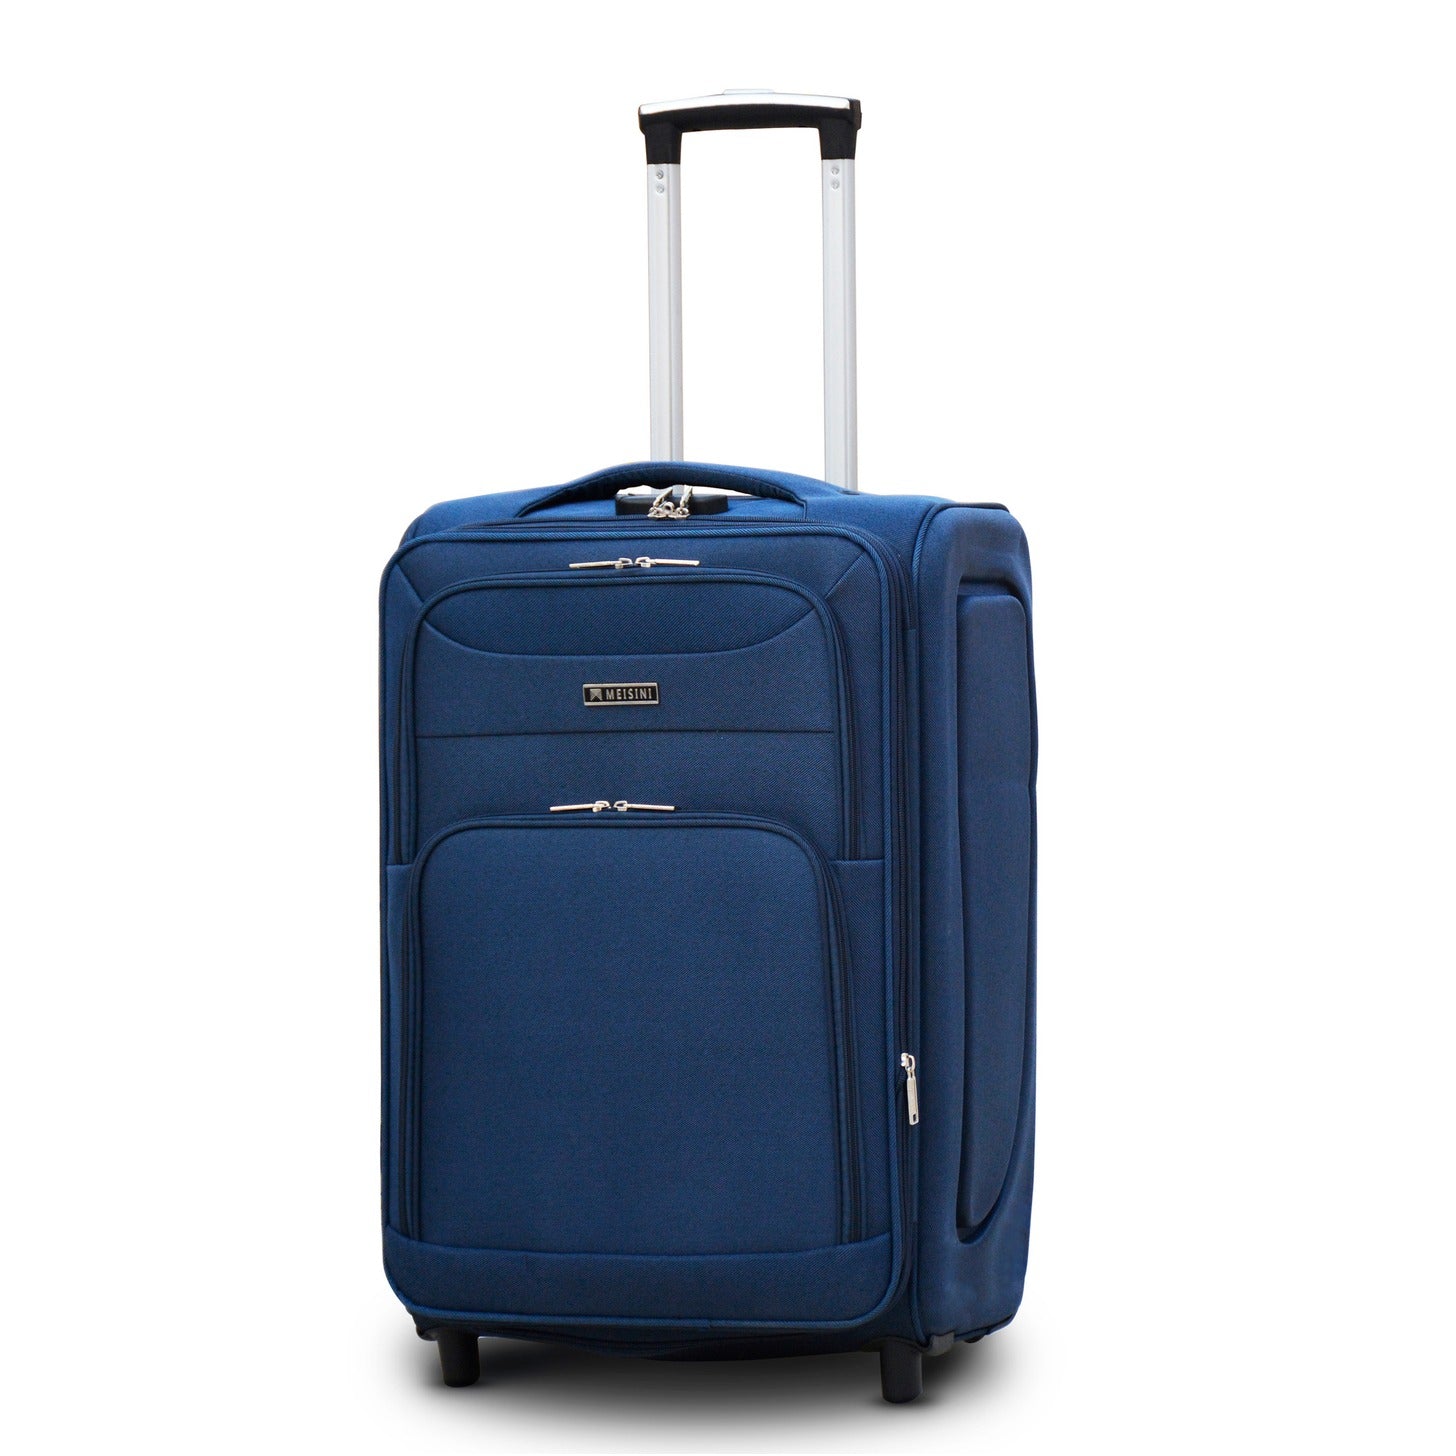 24" Blue Colour LP 2  Wheel 0161 Luggage Lightweight Soft Material Trolley Bag